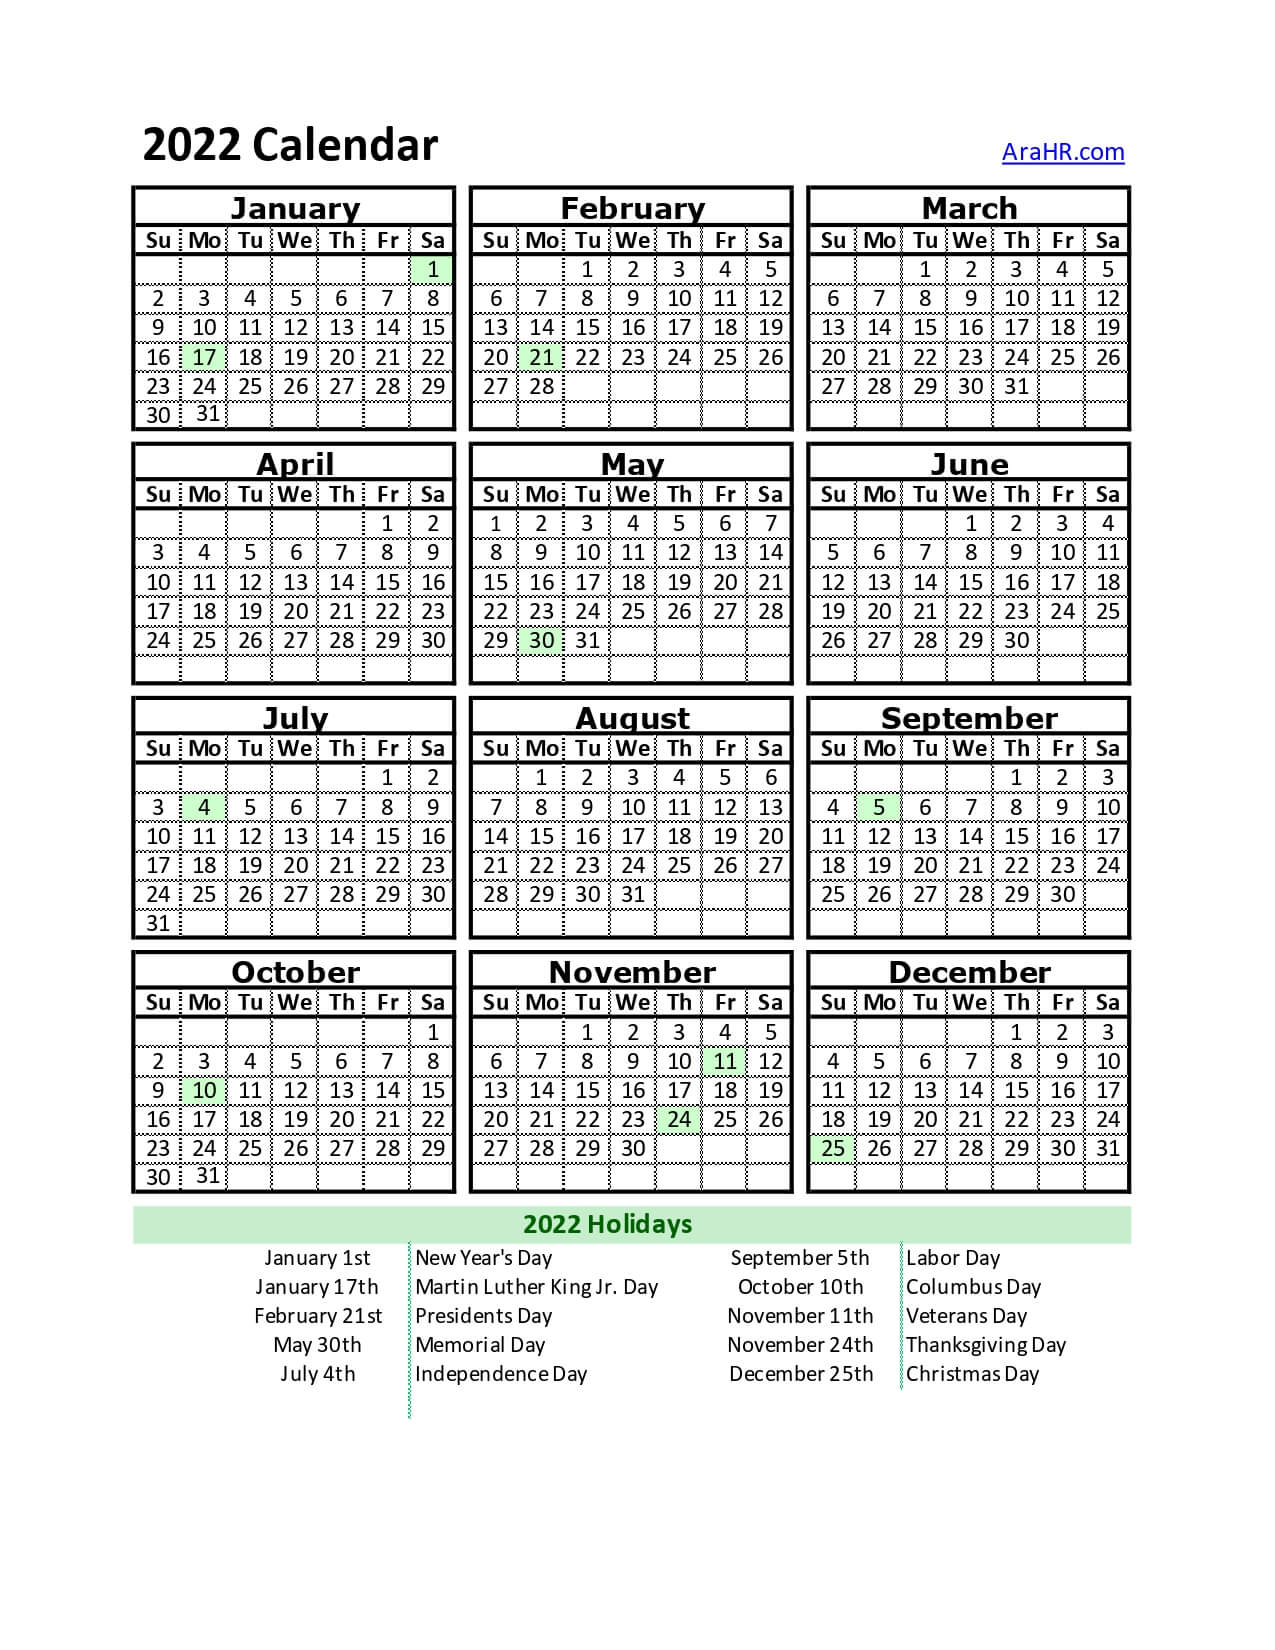 2022 Calendar Yearly Monthly Free Printable Template Excel Pdf Image Arahr